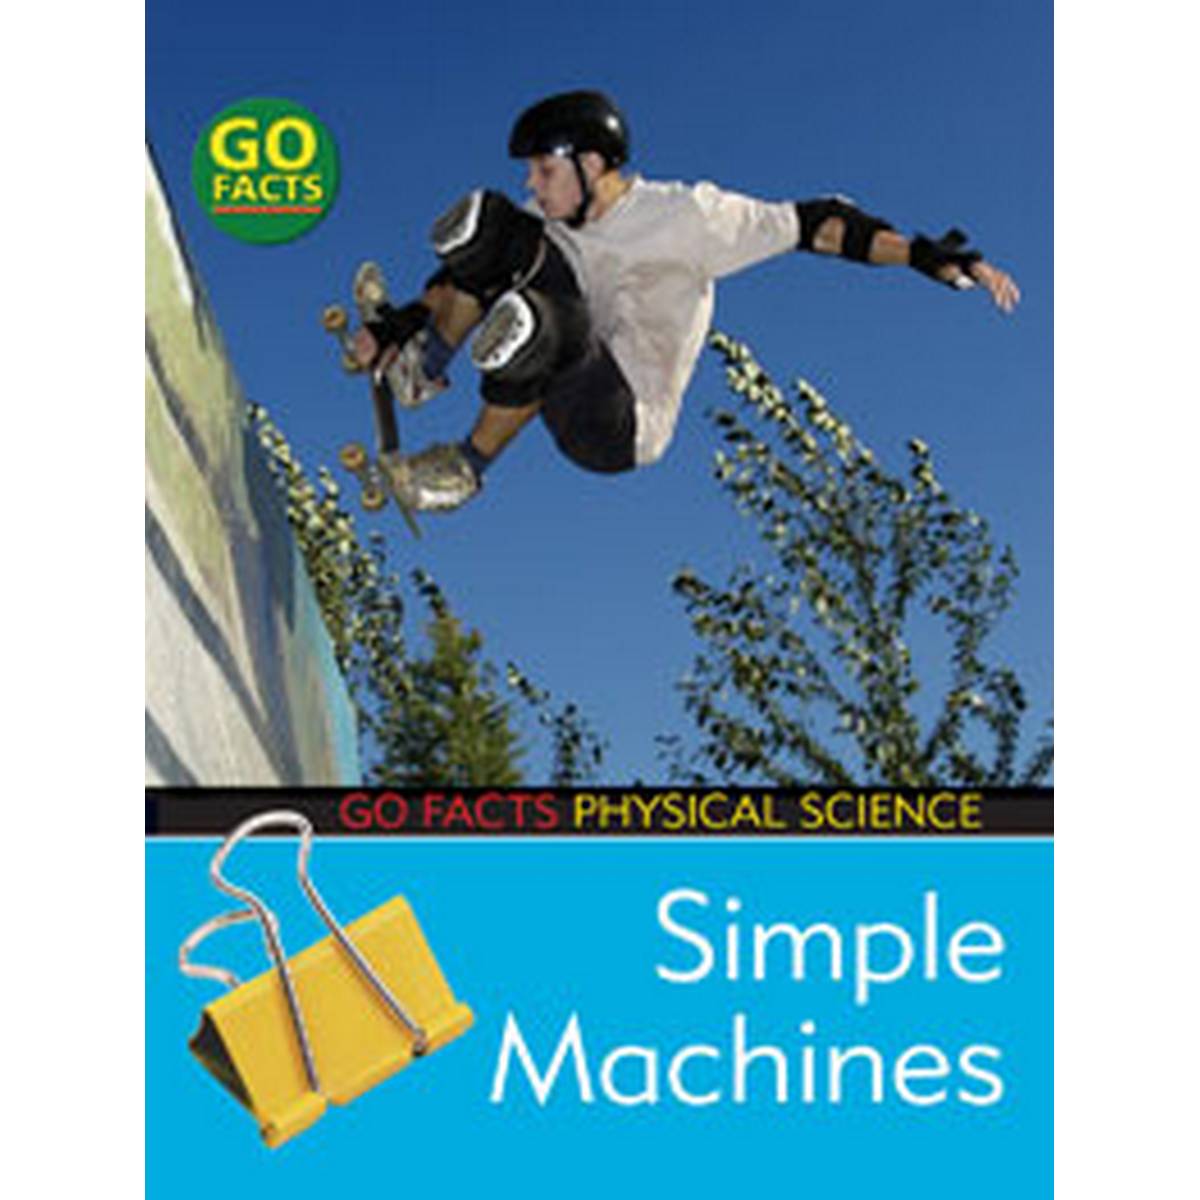 Simple Machines (Go Facts: Physical Science)